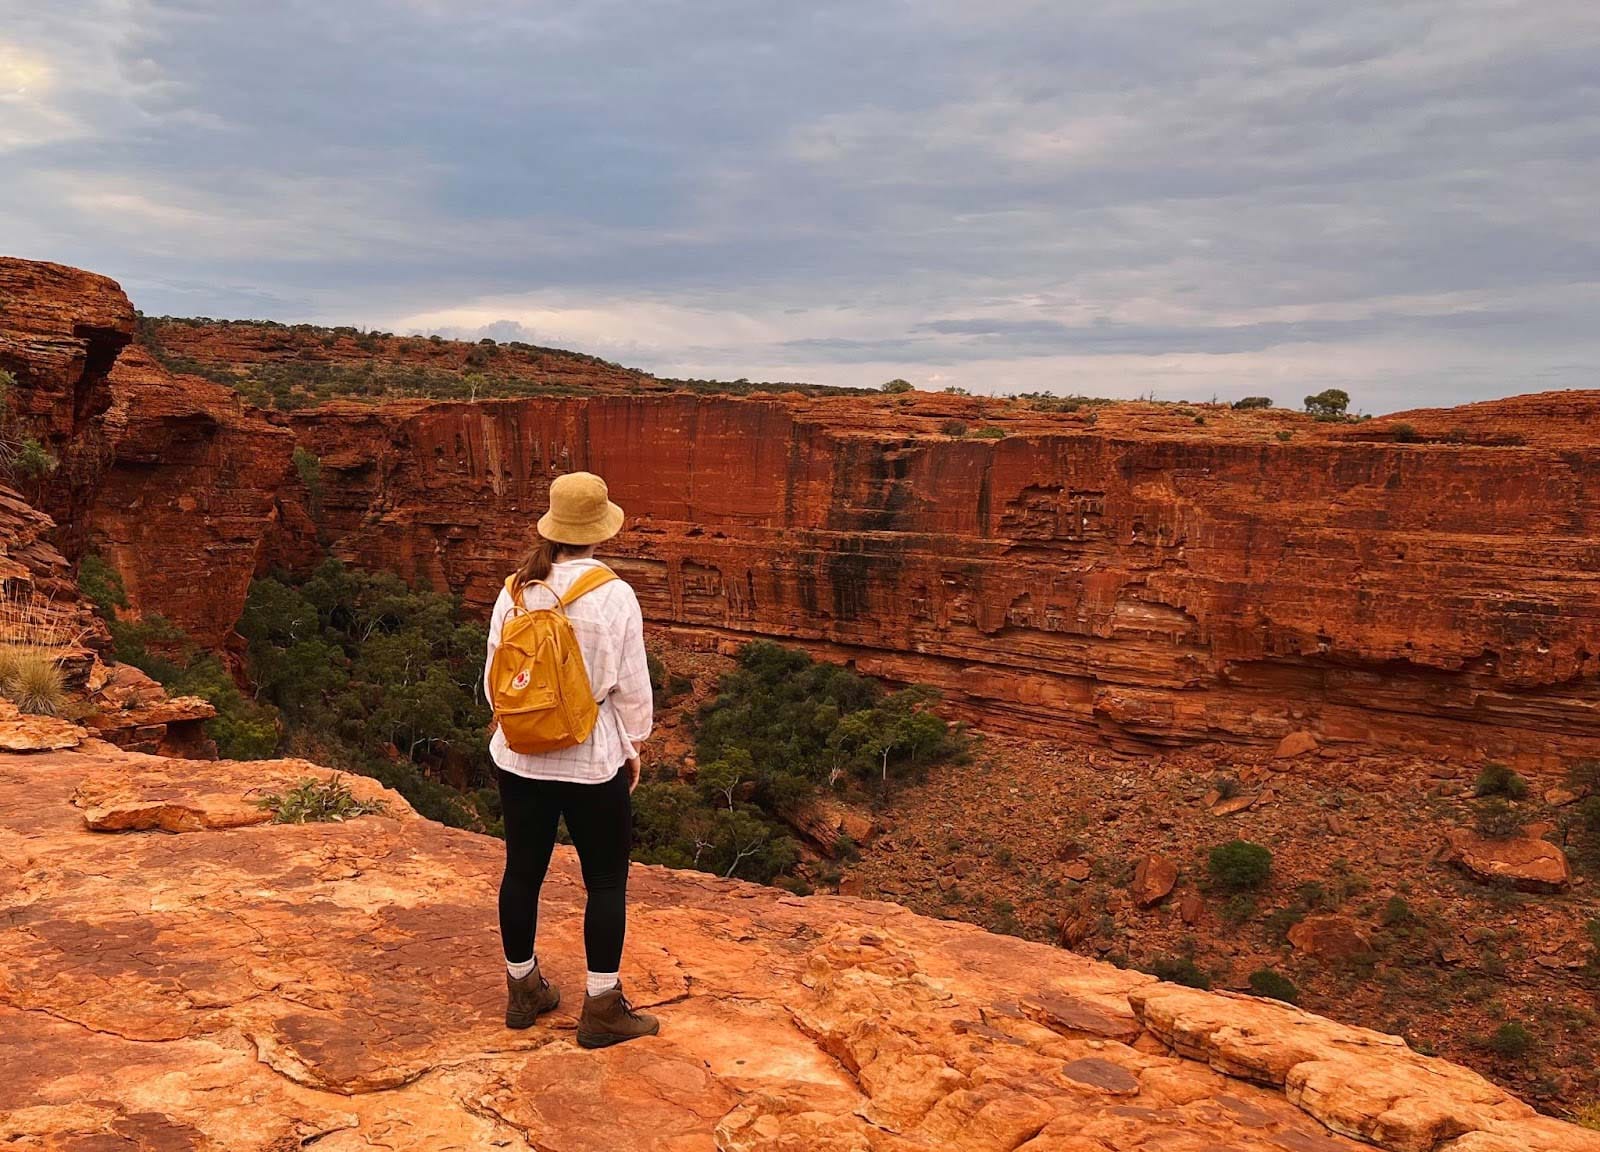 Lights, Canyon, Action: Experiencing The Red Centre’s Newest Immersive Art Installation, ally burnie